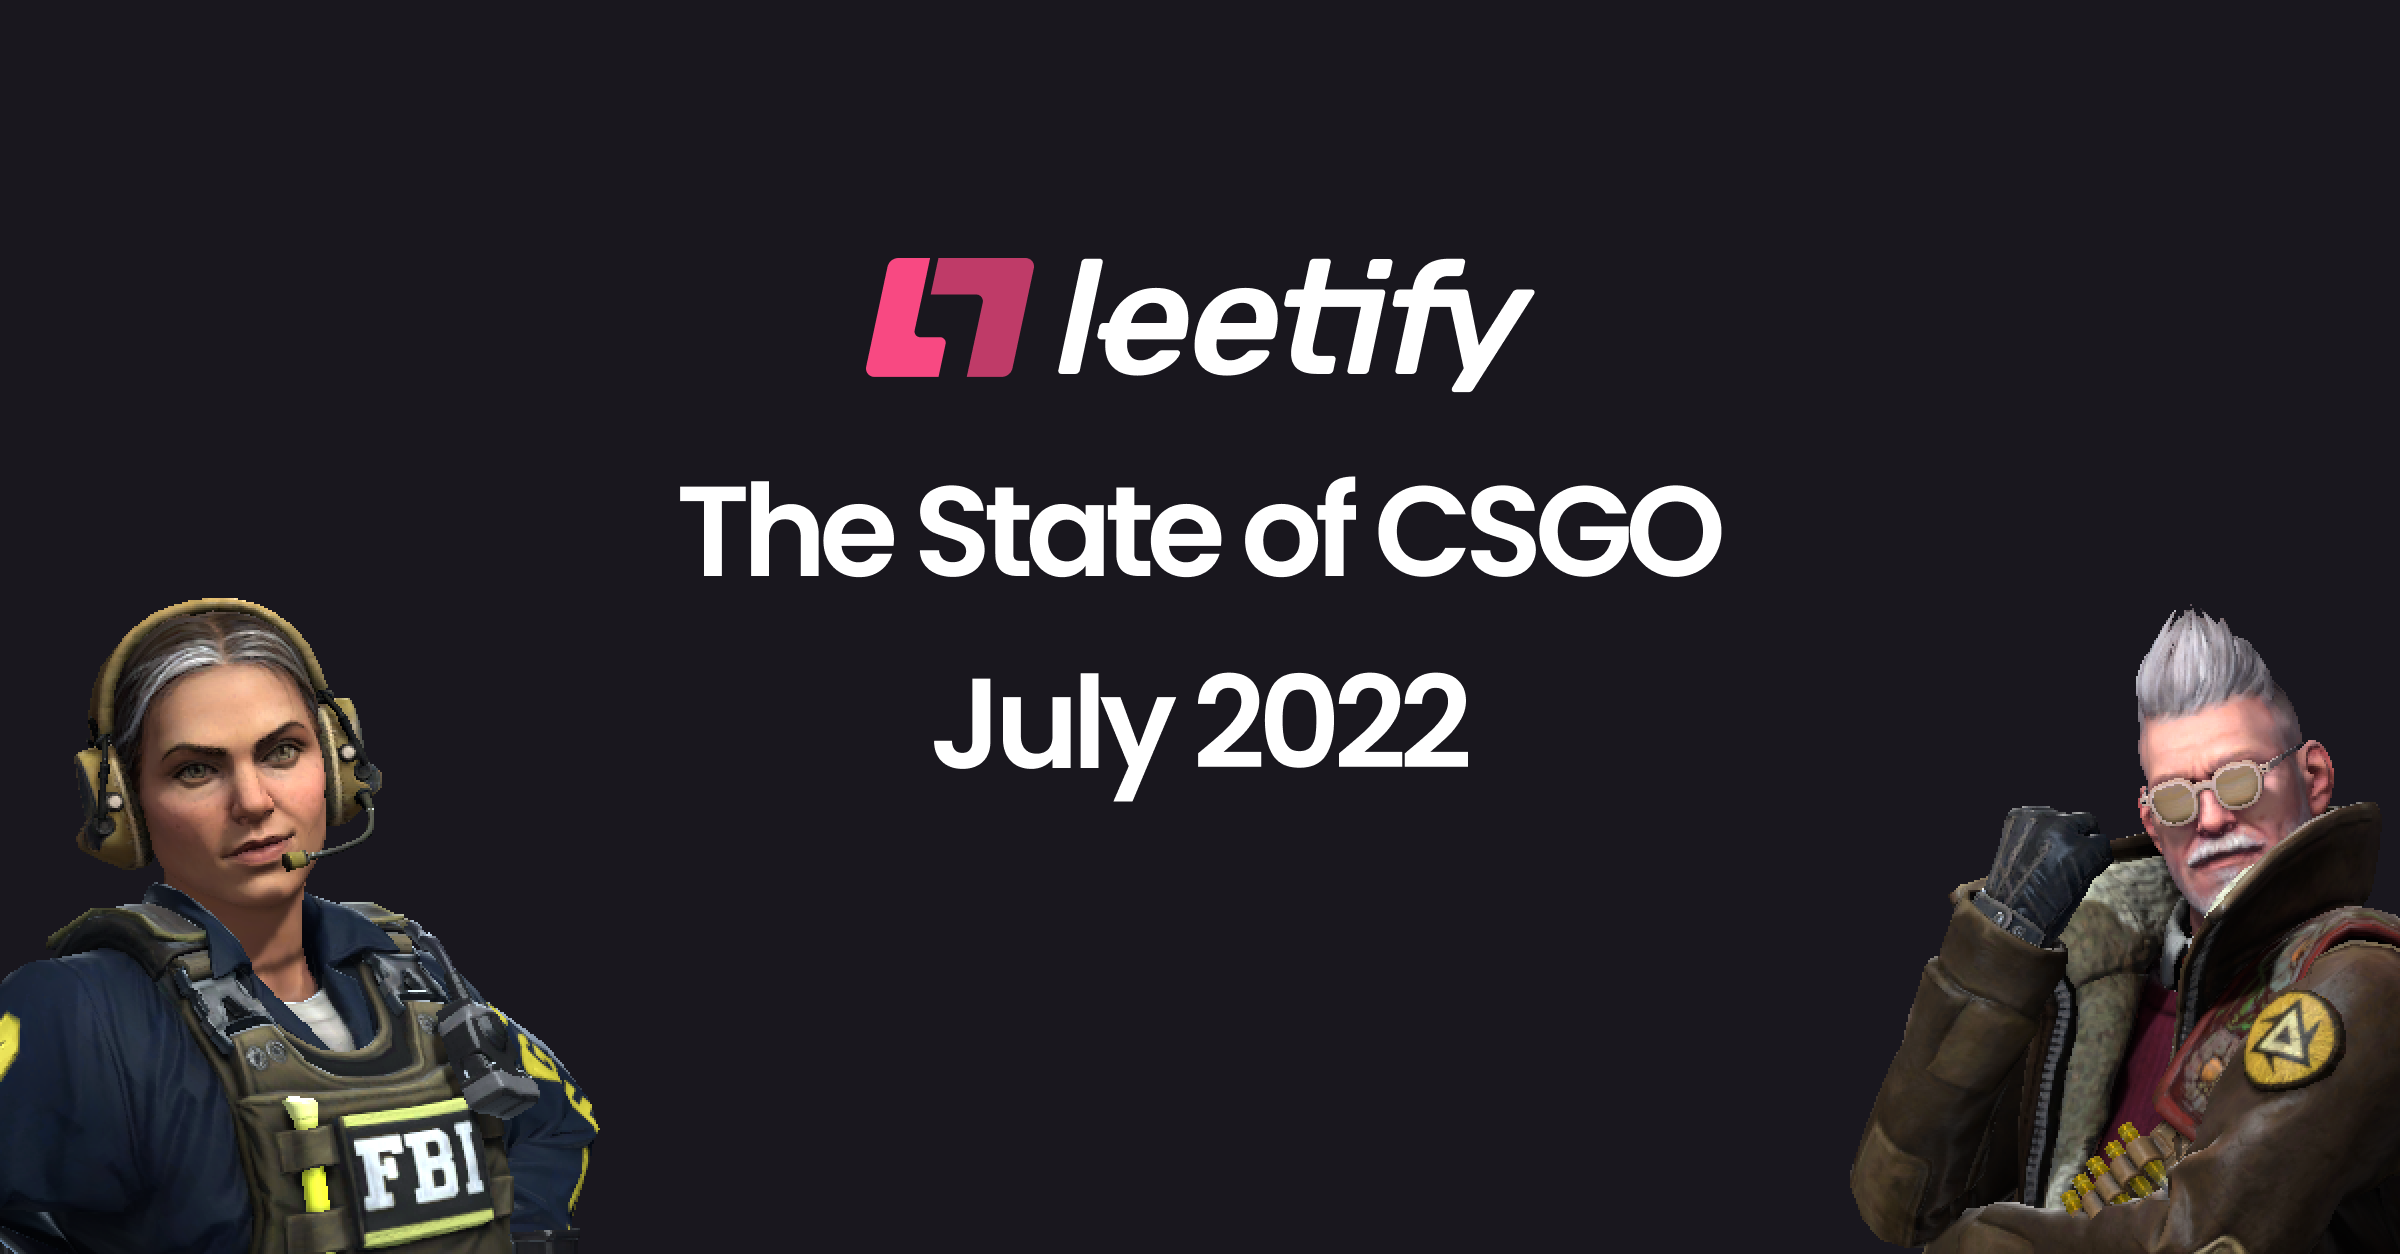 The State of CSGO July 2022